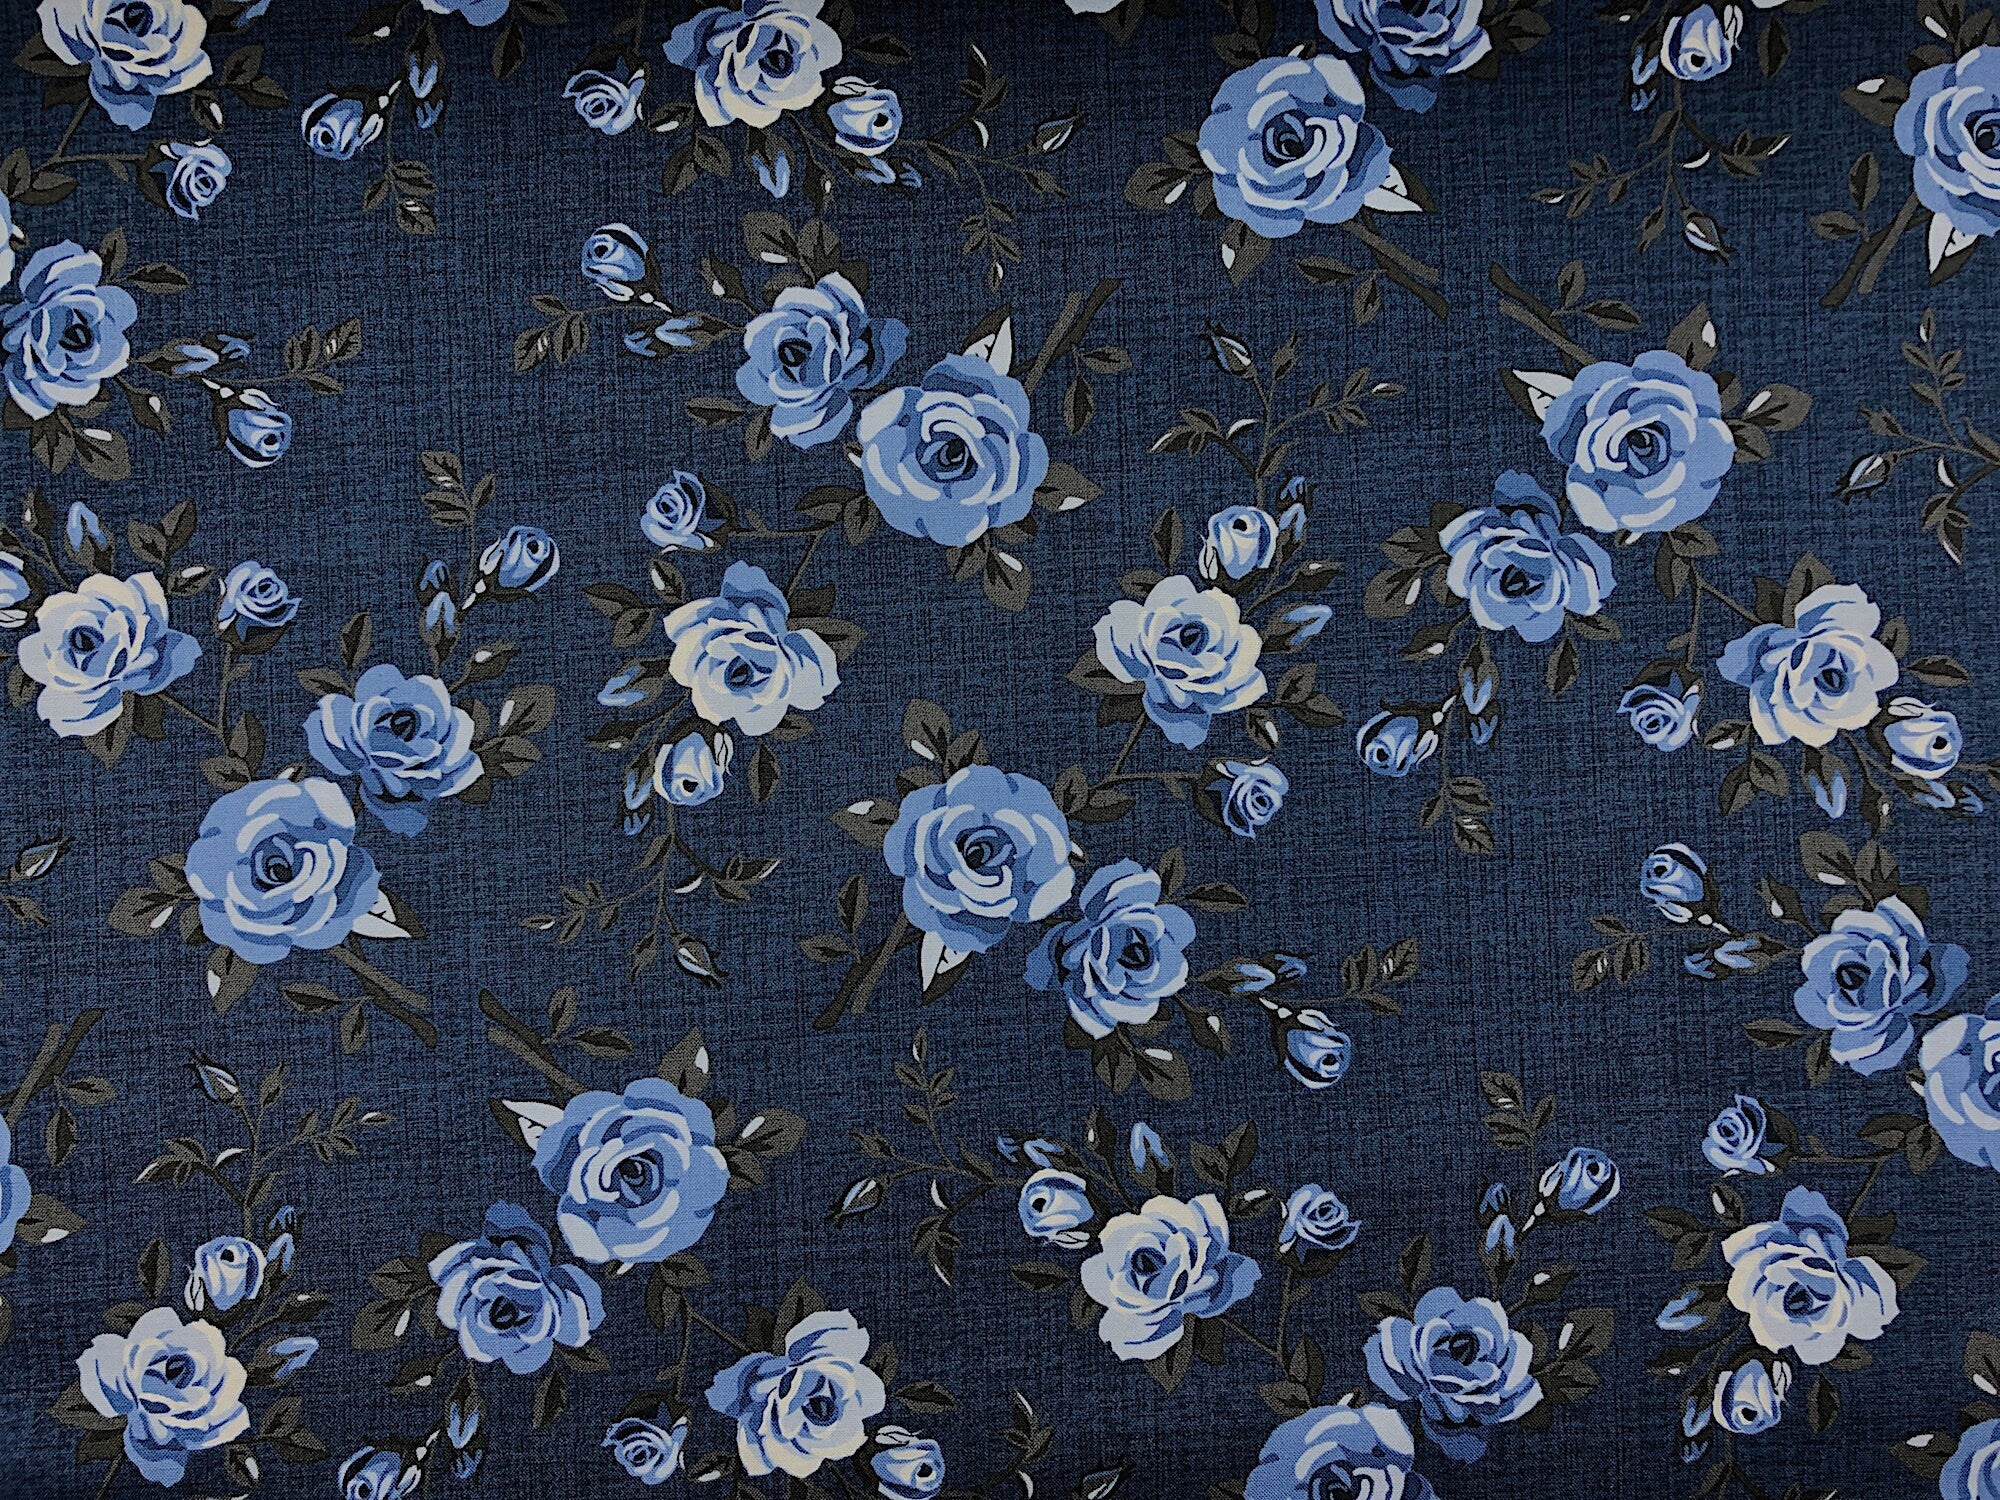 This fabric is part of the Elegant Blooms Collection and is covered with blue roses on a dark blue background.